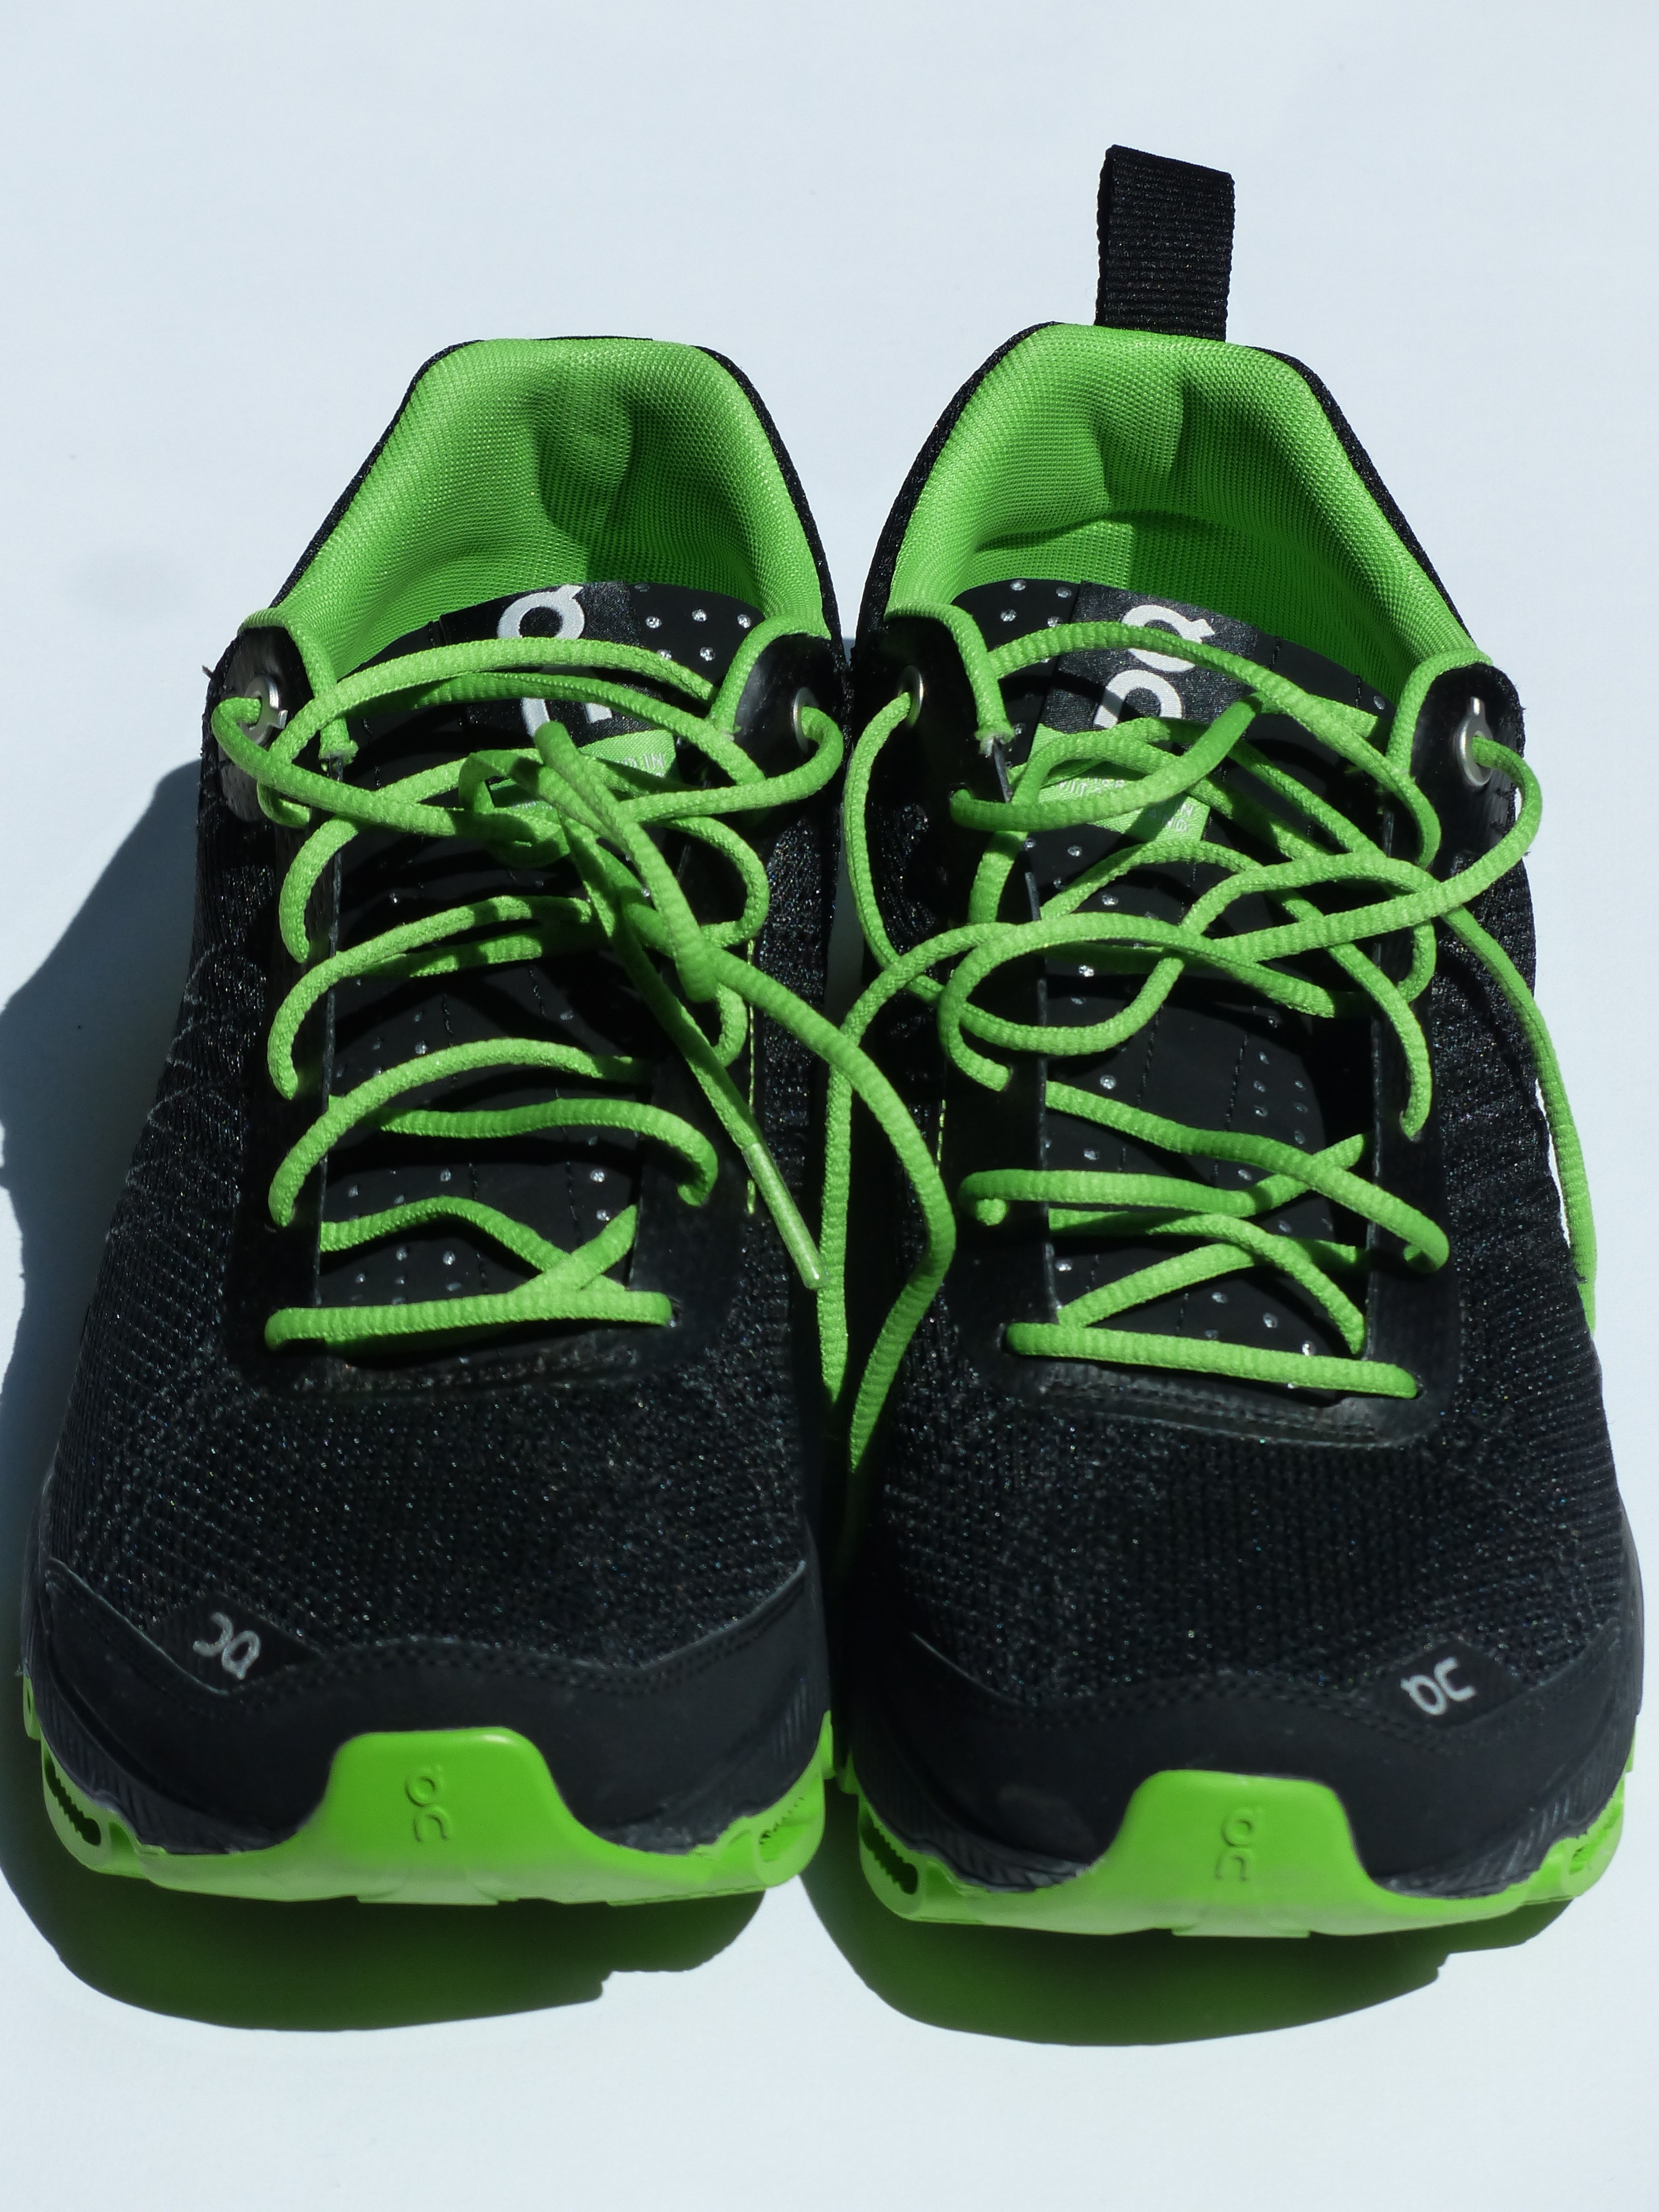 Sports Shoes, Running Shoes, Sneakers, shoe, clothing